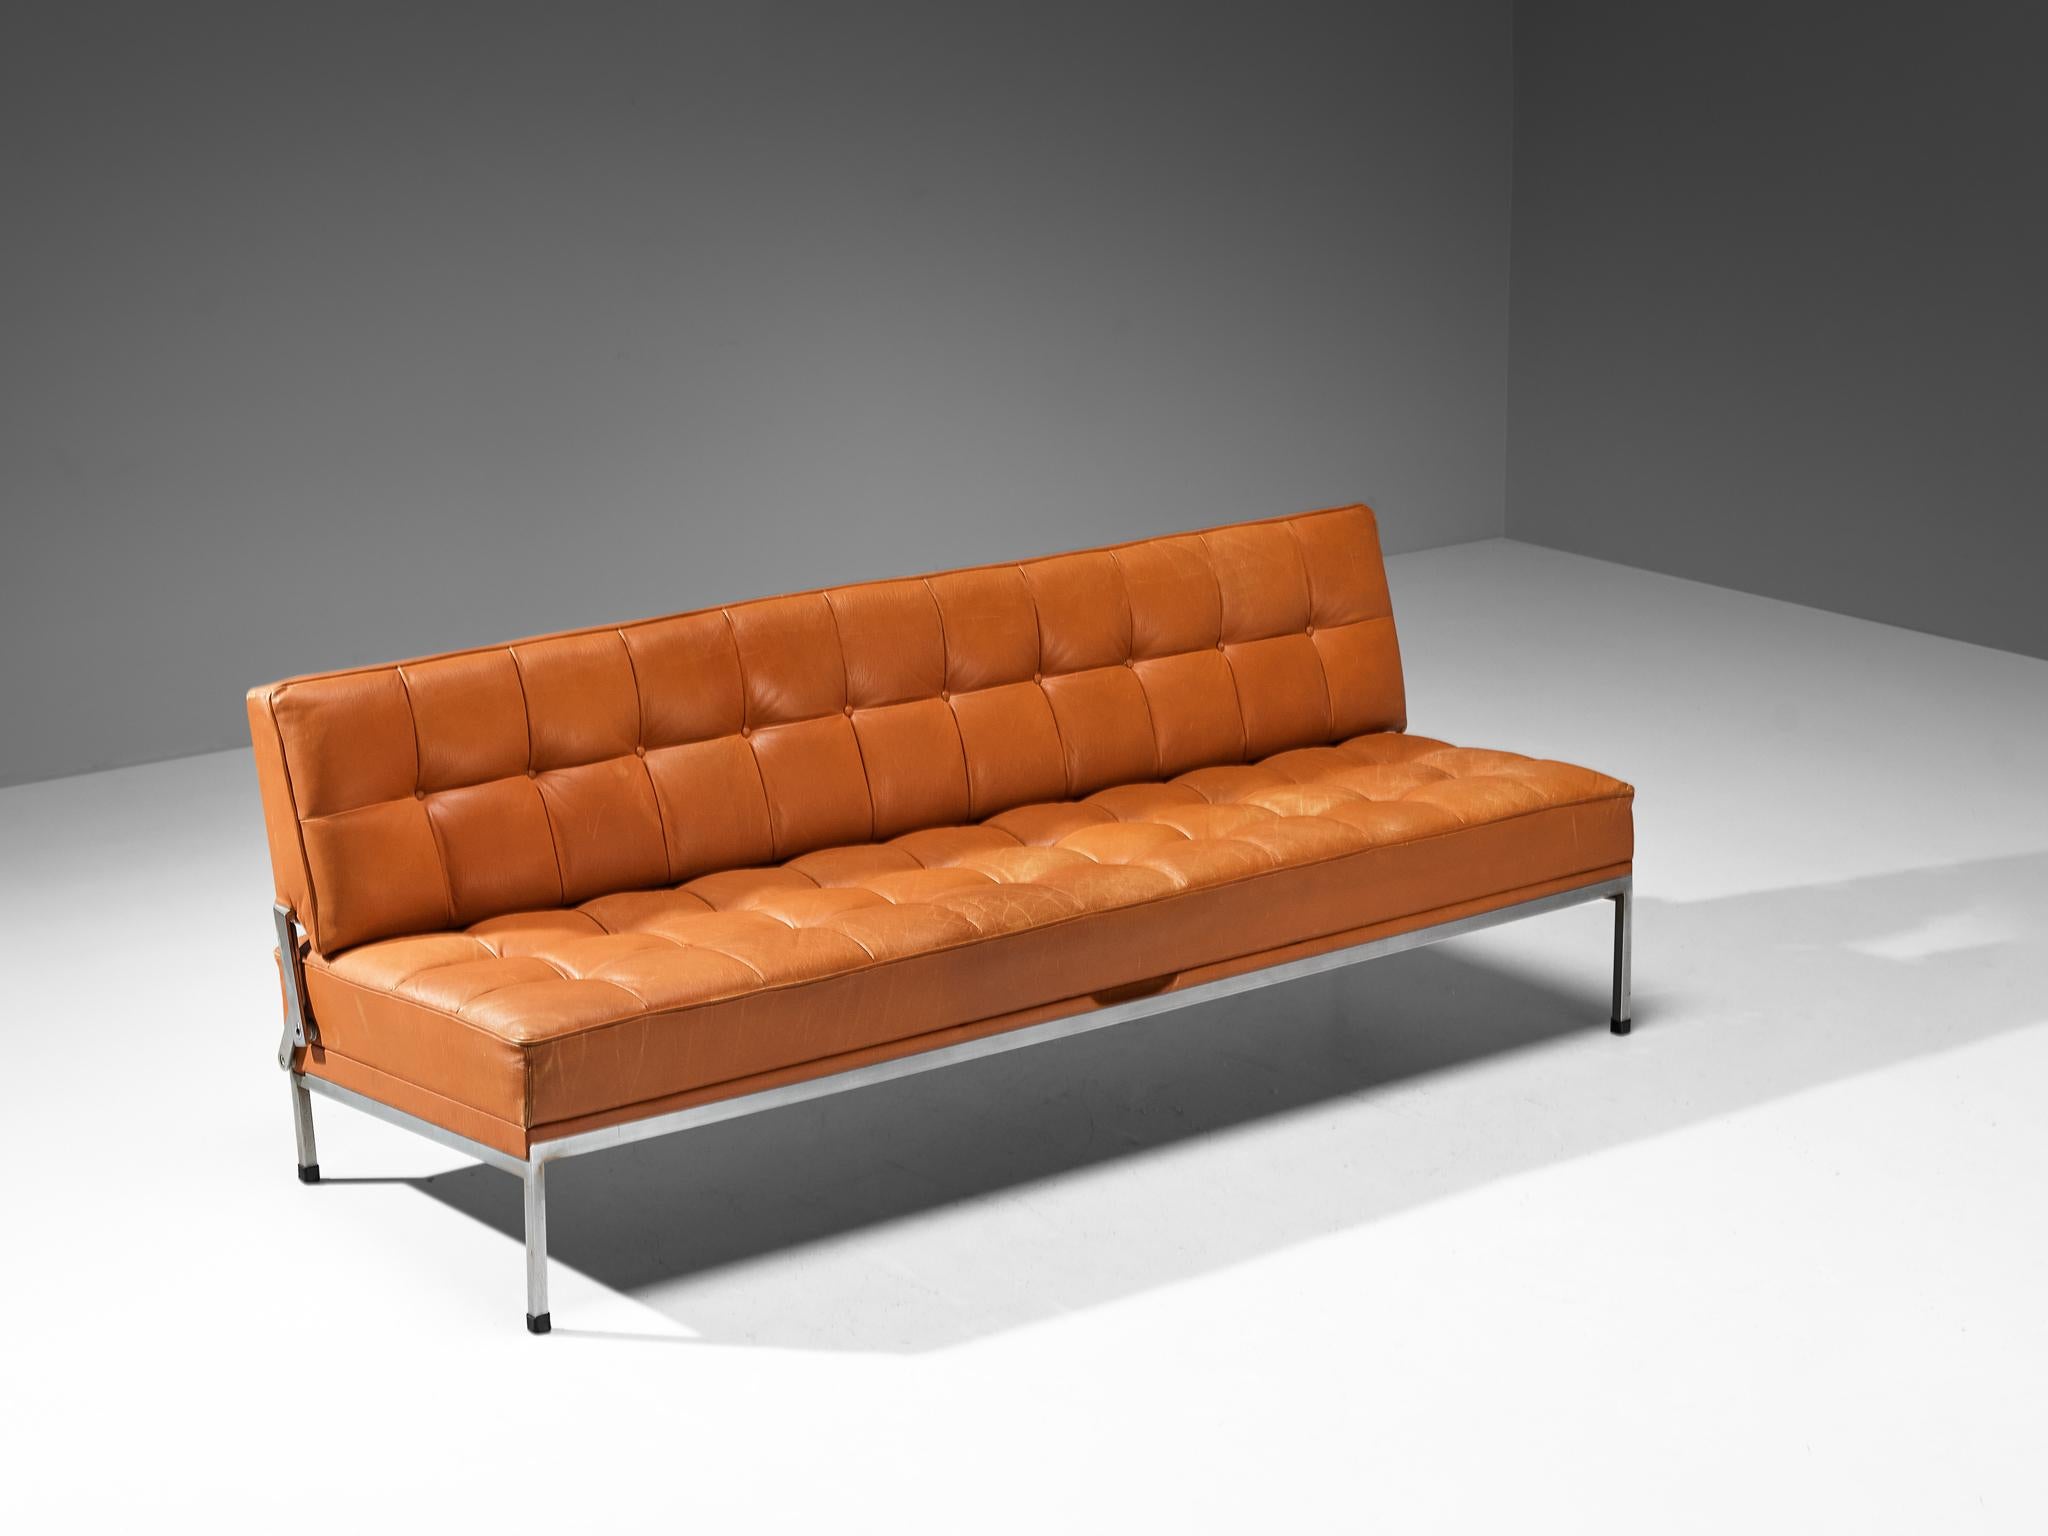 Johannes Spalt for Wittmann, sofa or daybed 'Constanze', leather, steel, Austria, 1960s

This daybed, model 'Constanze', is designed by Austrian designer Johannes Spalt in the 1960s. This piece is typical for Mid-Century Modern design. The tufted